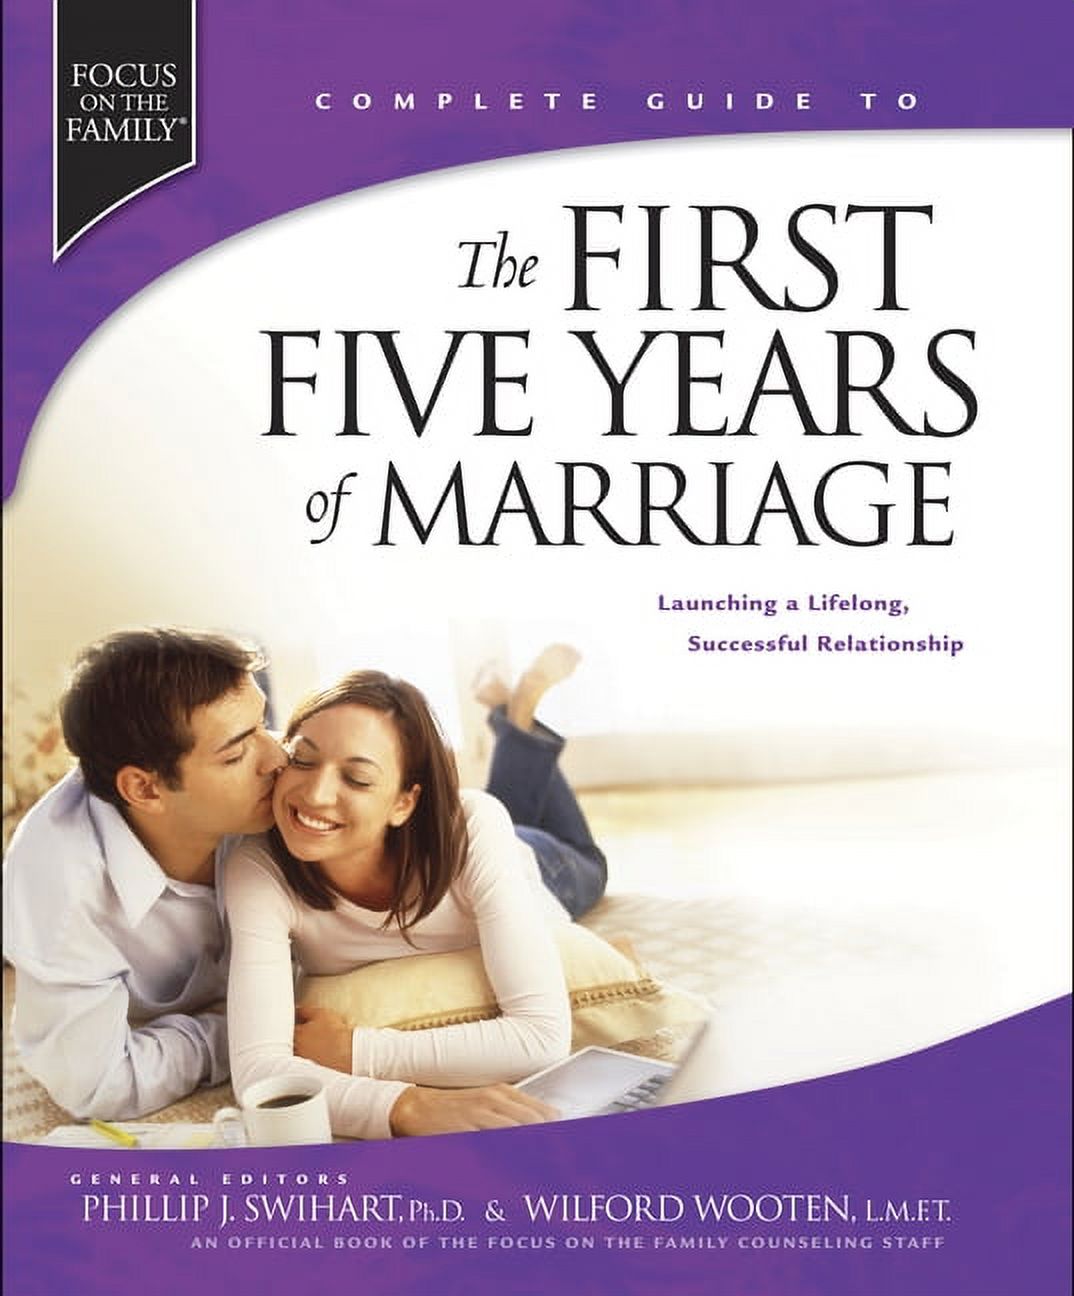 Fotf Complete Guide: The First Five Years of Marriage : Launching a Lifelong, Successful Relationship (Hardcover) - image 1 of 1